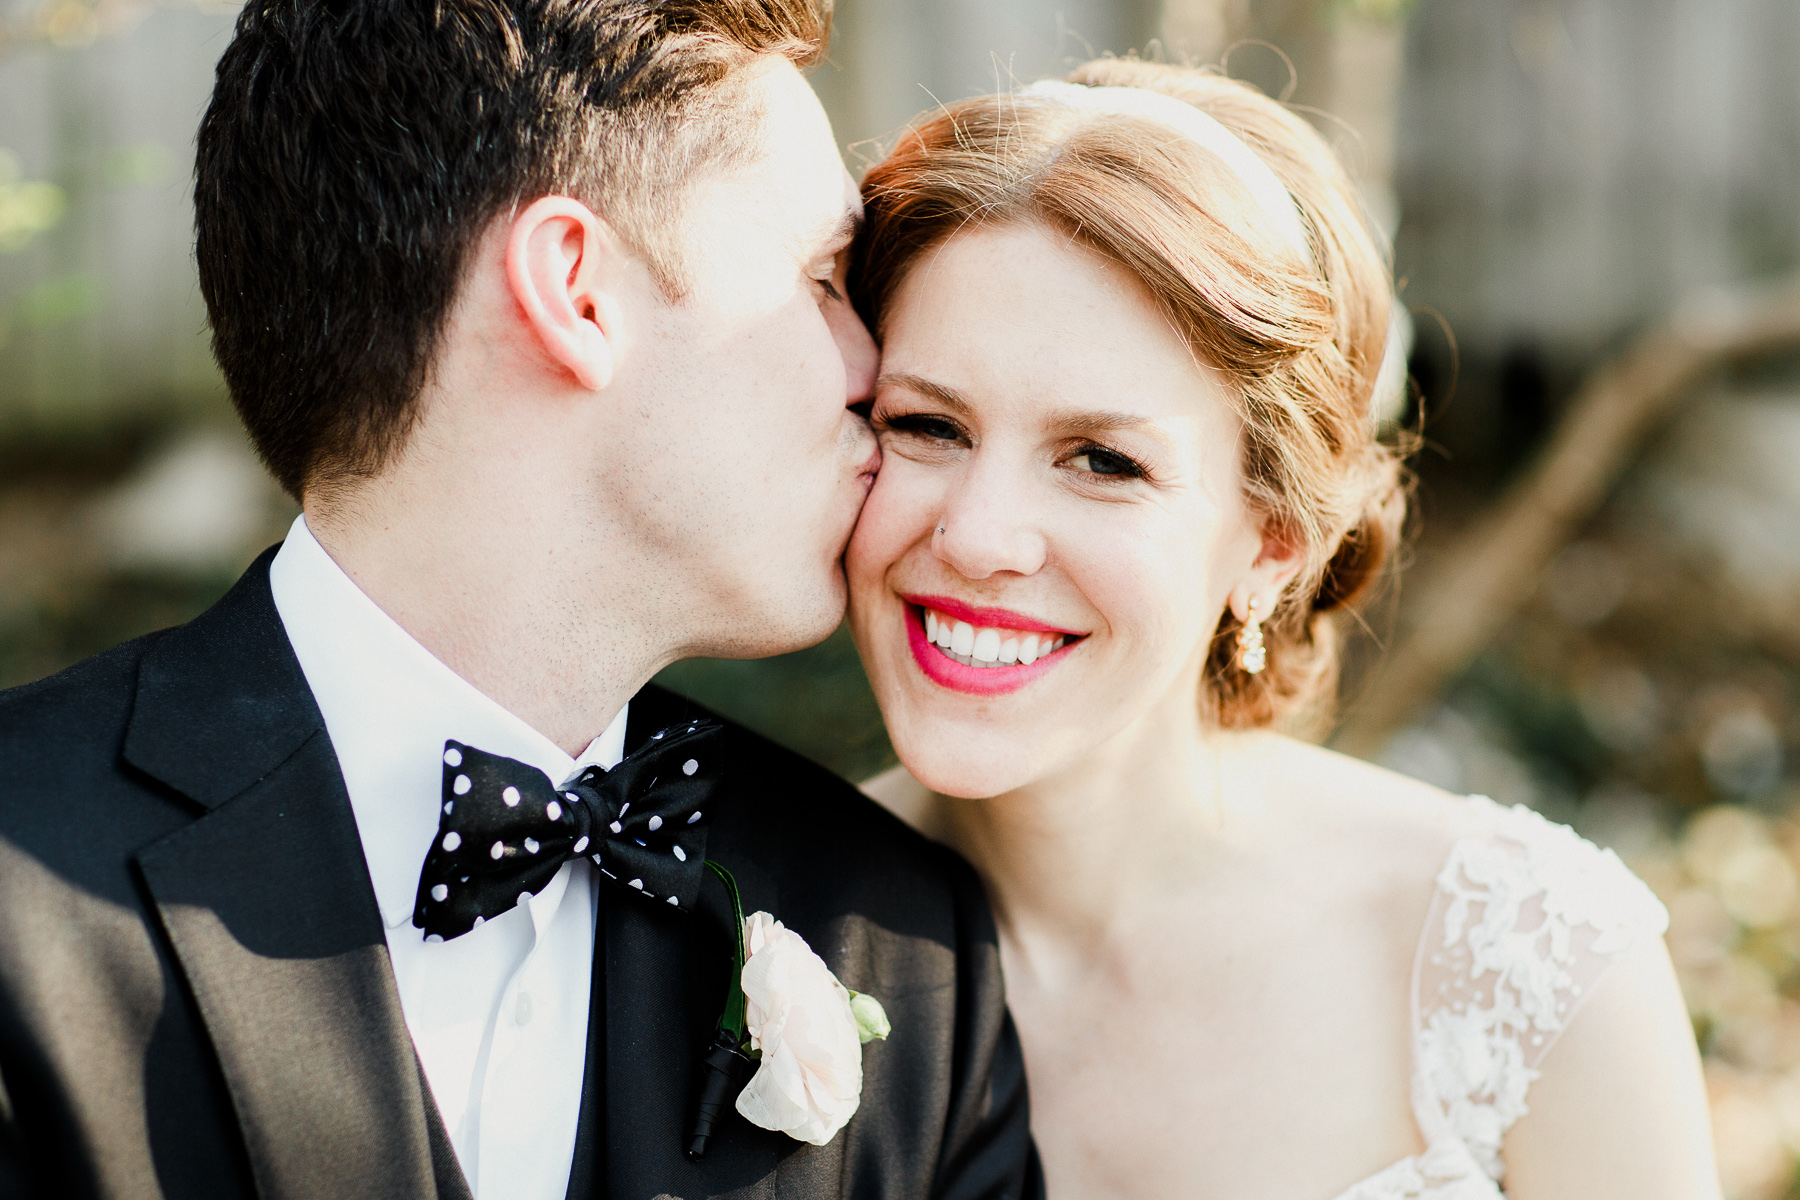 A Comprehensive Guide to Choosing the Perfect Wedding Photographer